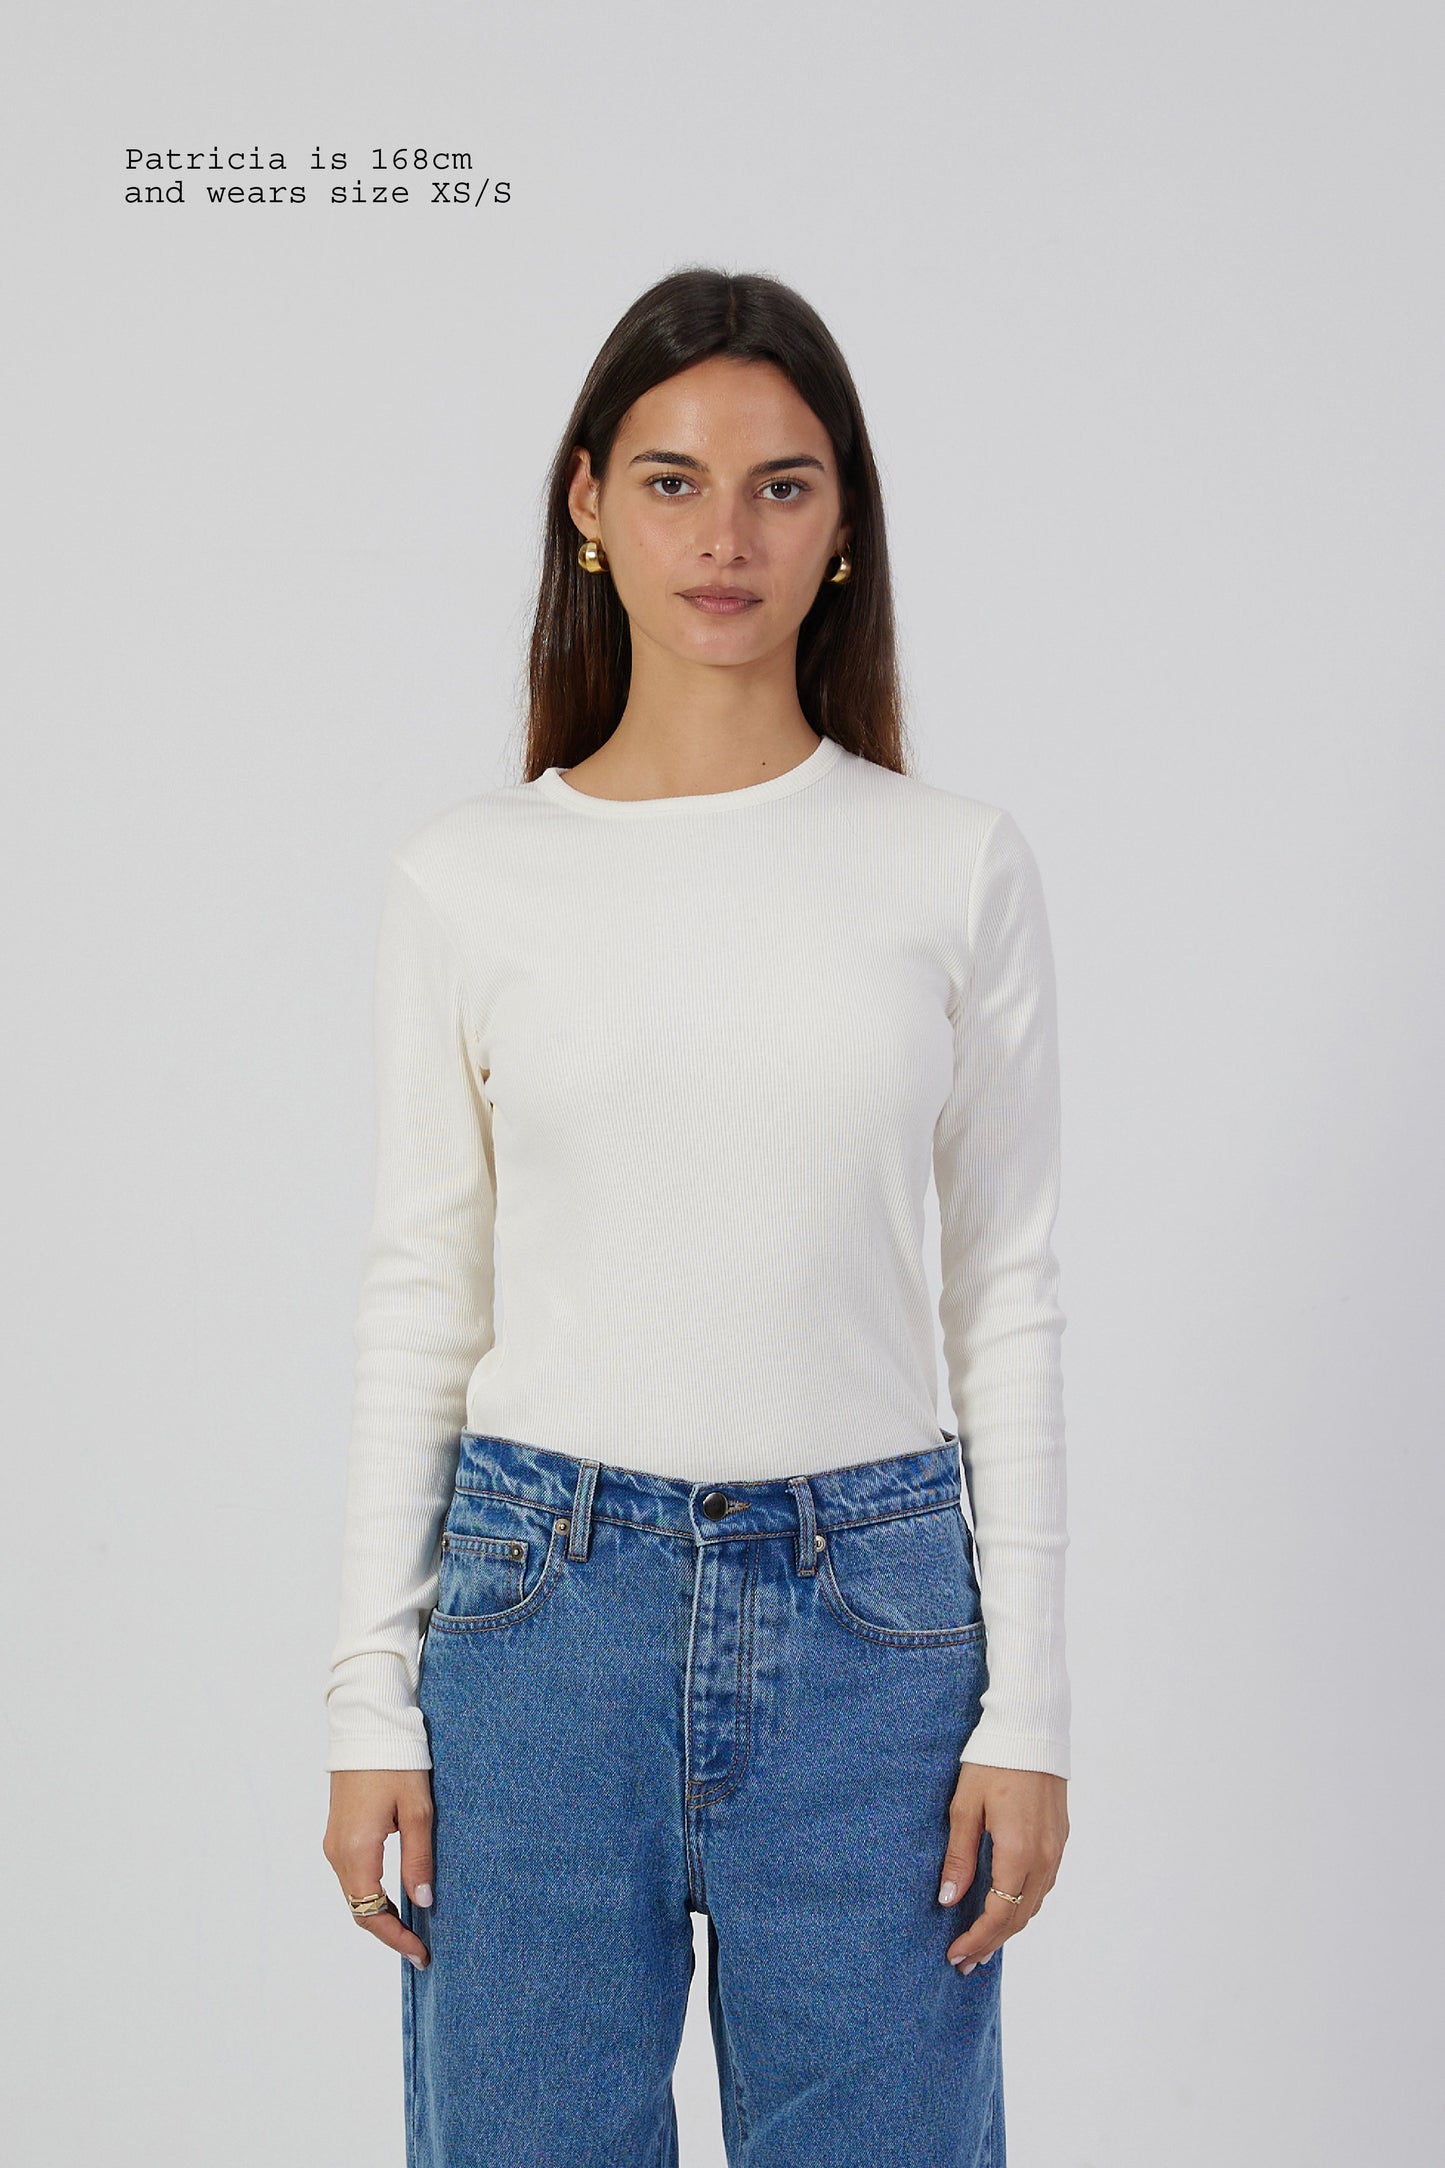 T-SHIRT RIBBED FITTED LONG SLEEVE